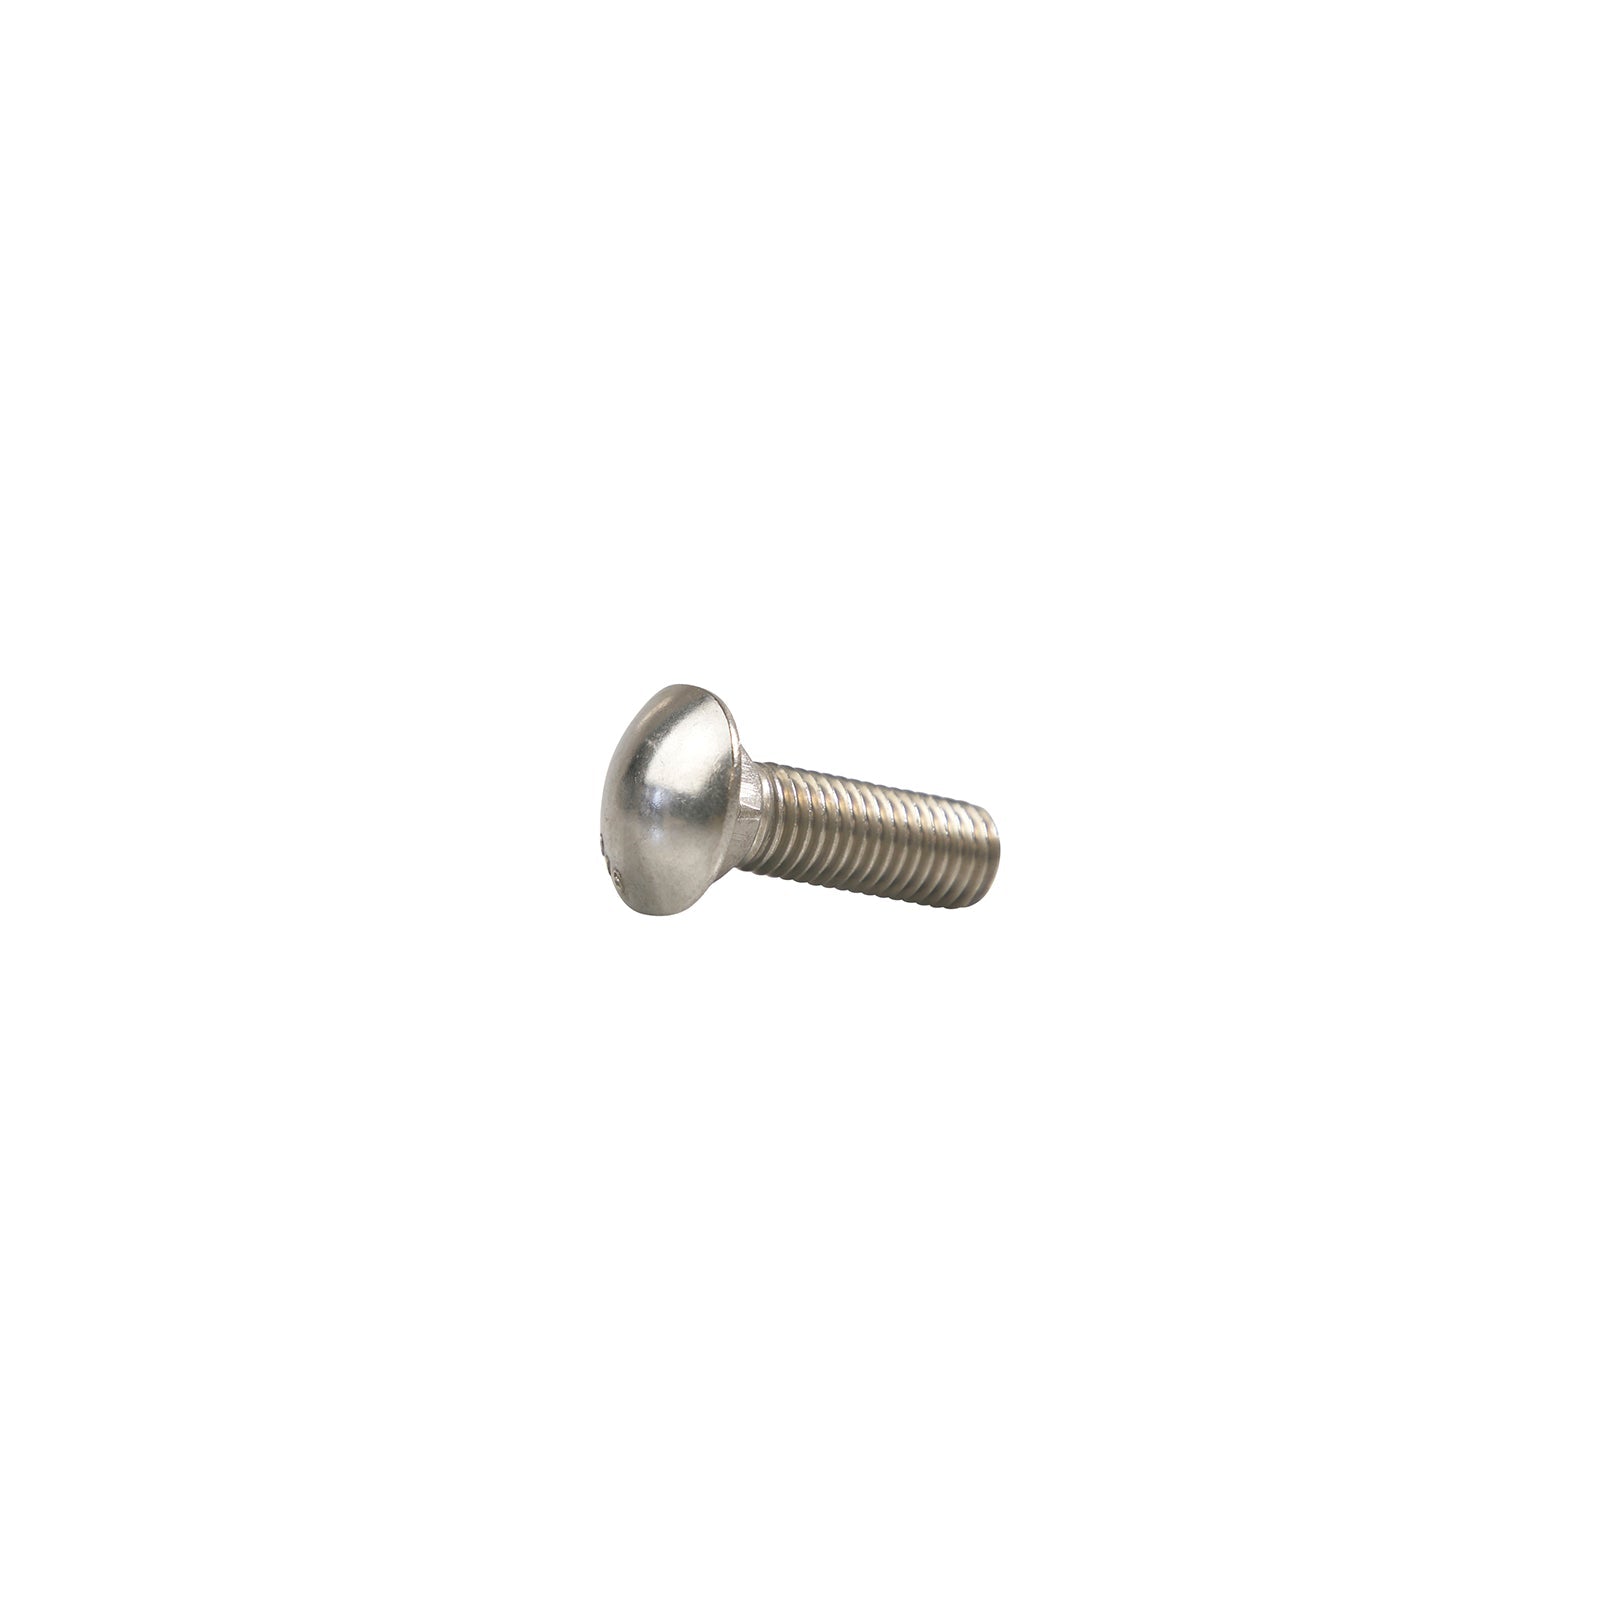 5/8-11 x 2 Conquest Carriage Bolt - 316 Stainless Steel